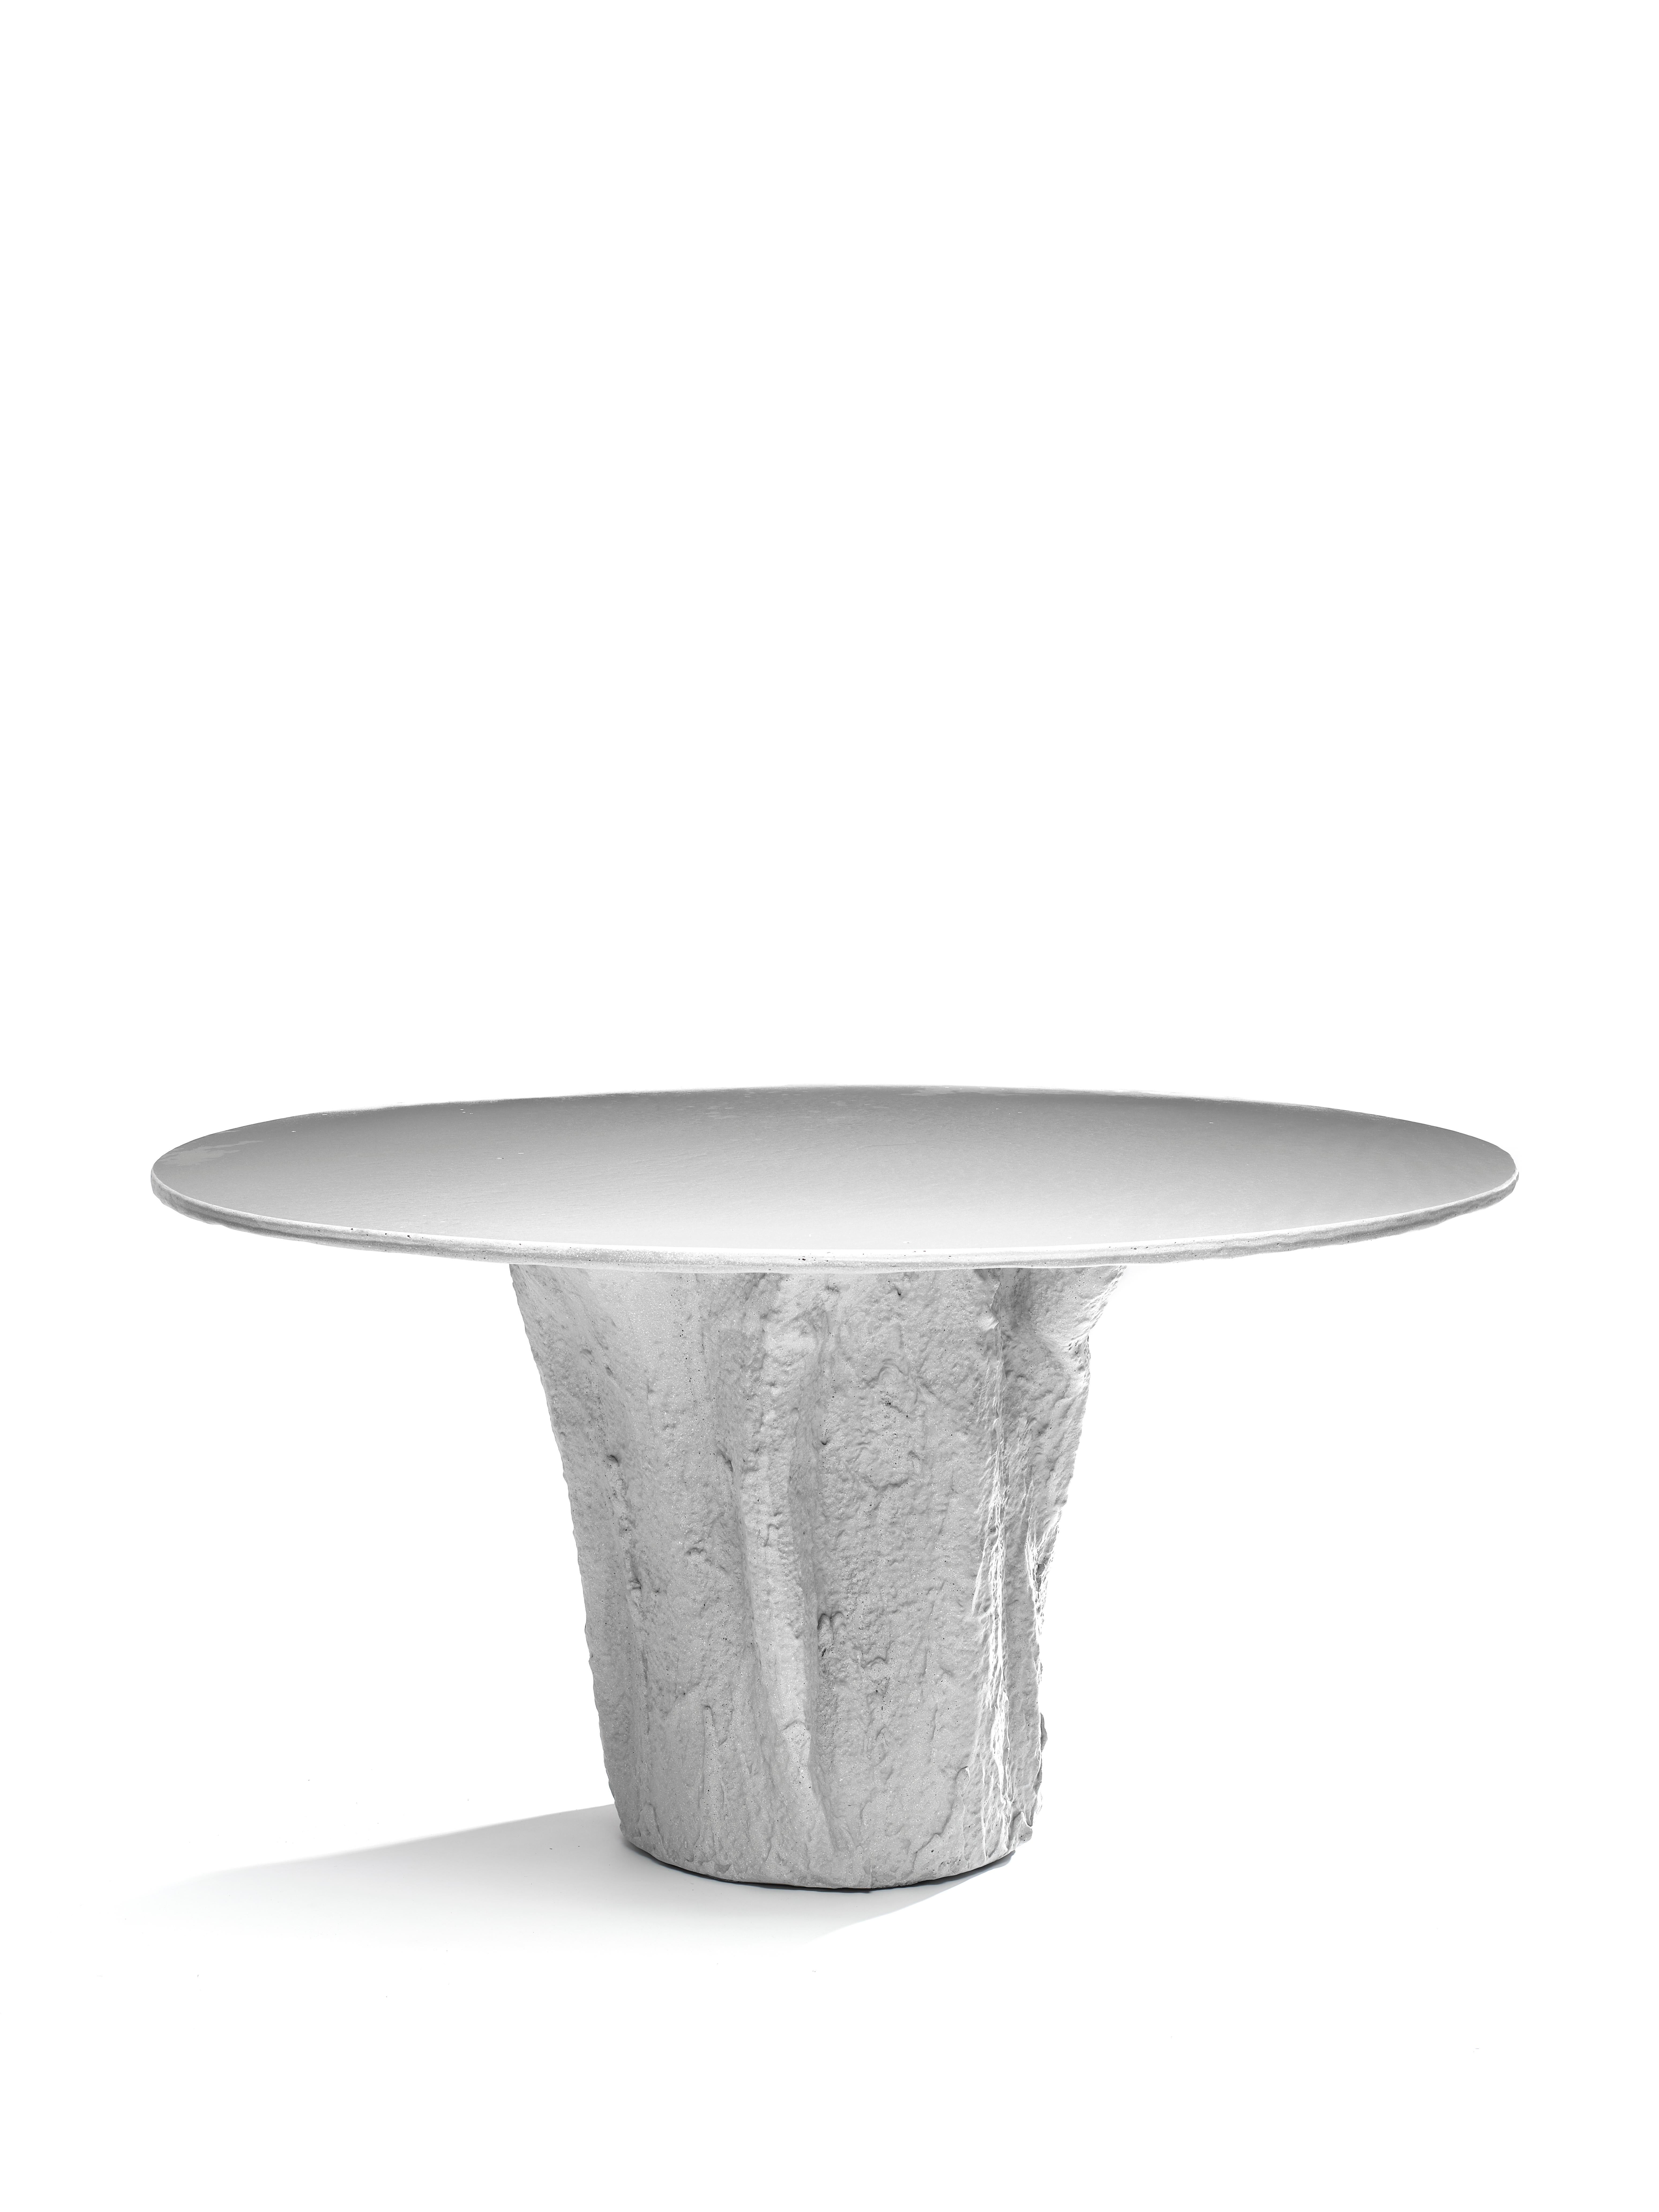 The light grey table from the Kernel series is a unique piece made entirely by hand by the designer. Completely built in Glebanite, a special blend of recycled and recyclable fiberglass. An artistic work of circular economy that takes care of the